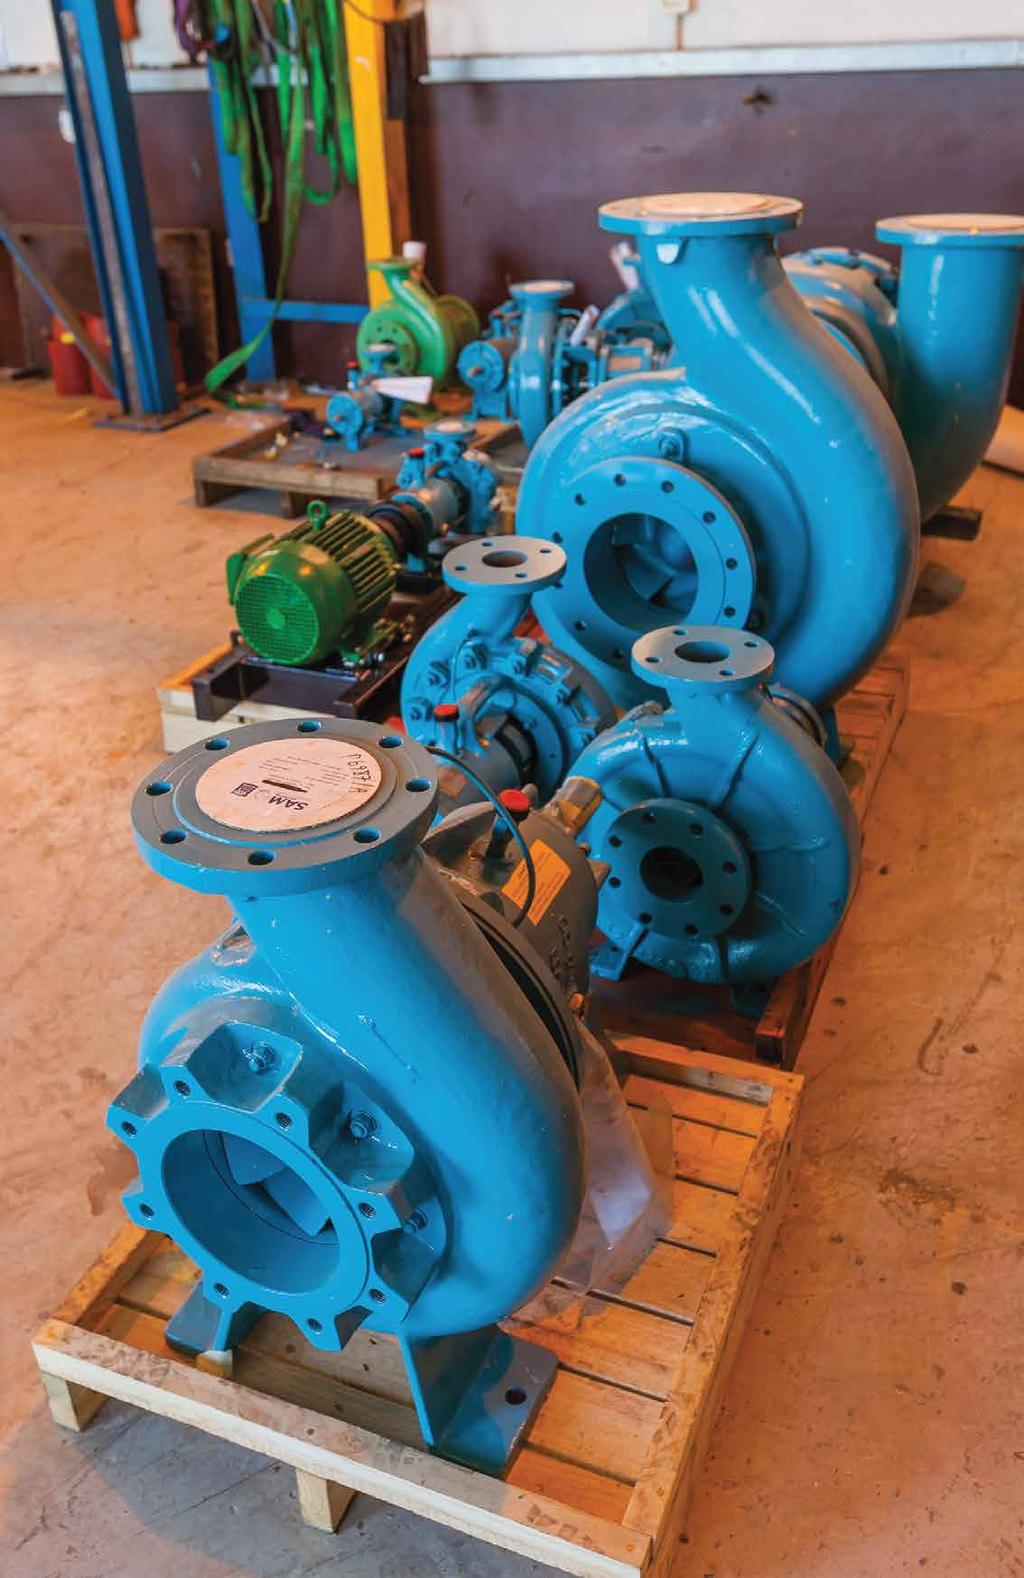 SAMCO Chemical Process Pumps CSO/CP Series CASING WEAR PLATES (CP ONLY): Pump models F3 upwards are fitted with replaceable casing wear plates, cutting the costs of replacing expensive casings and